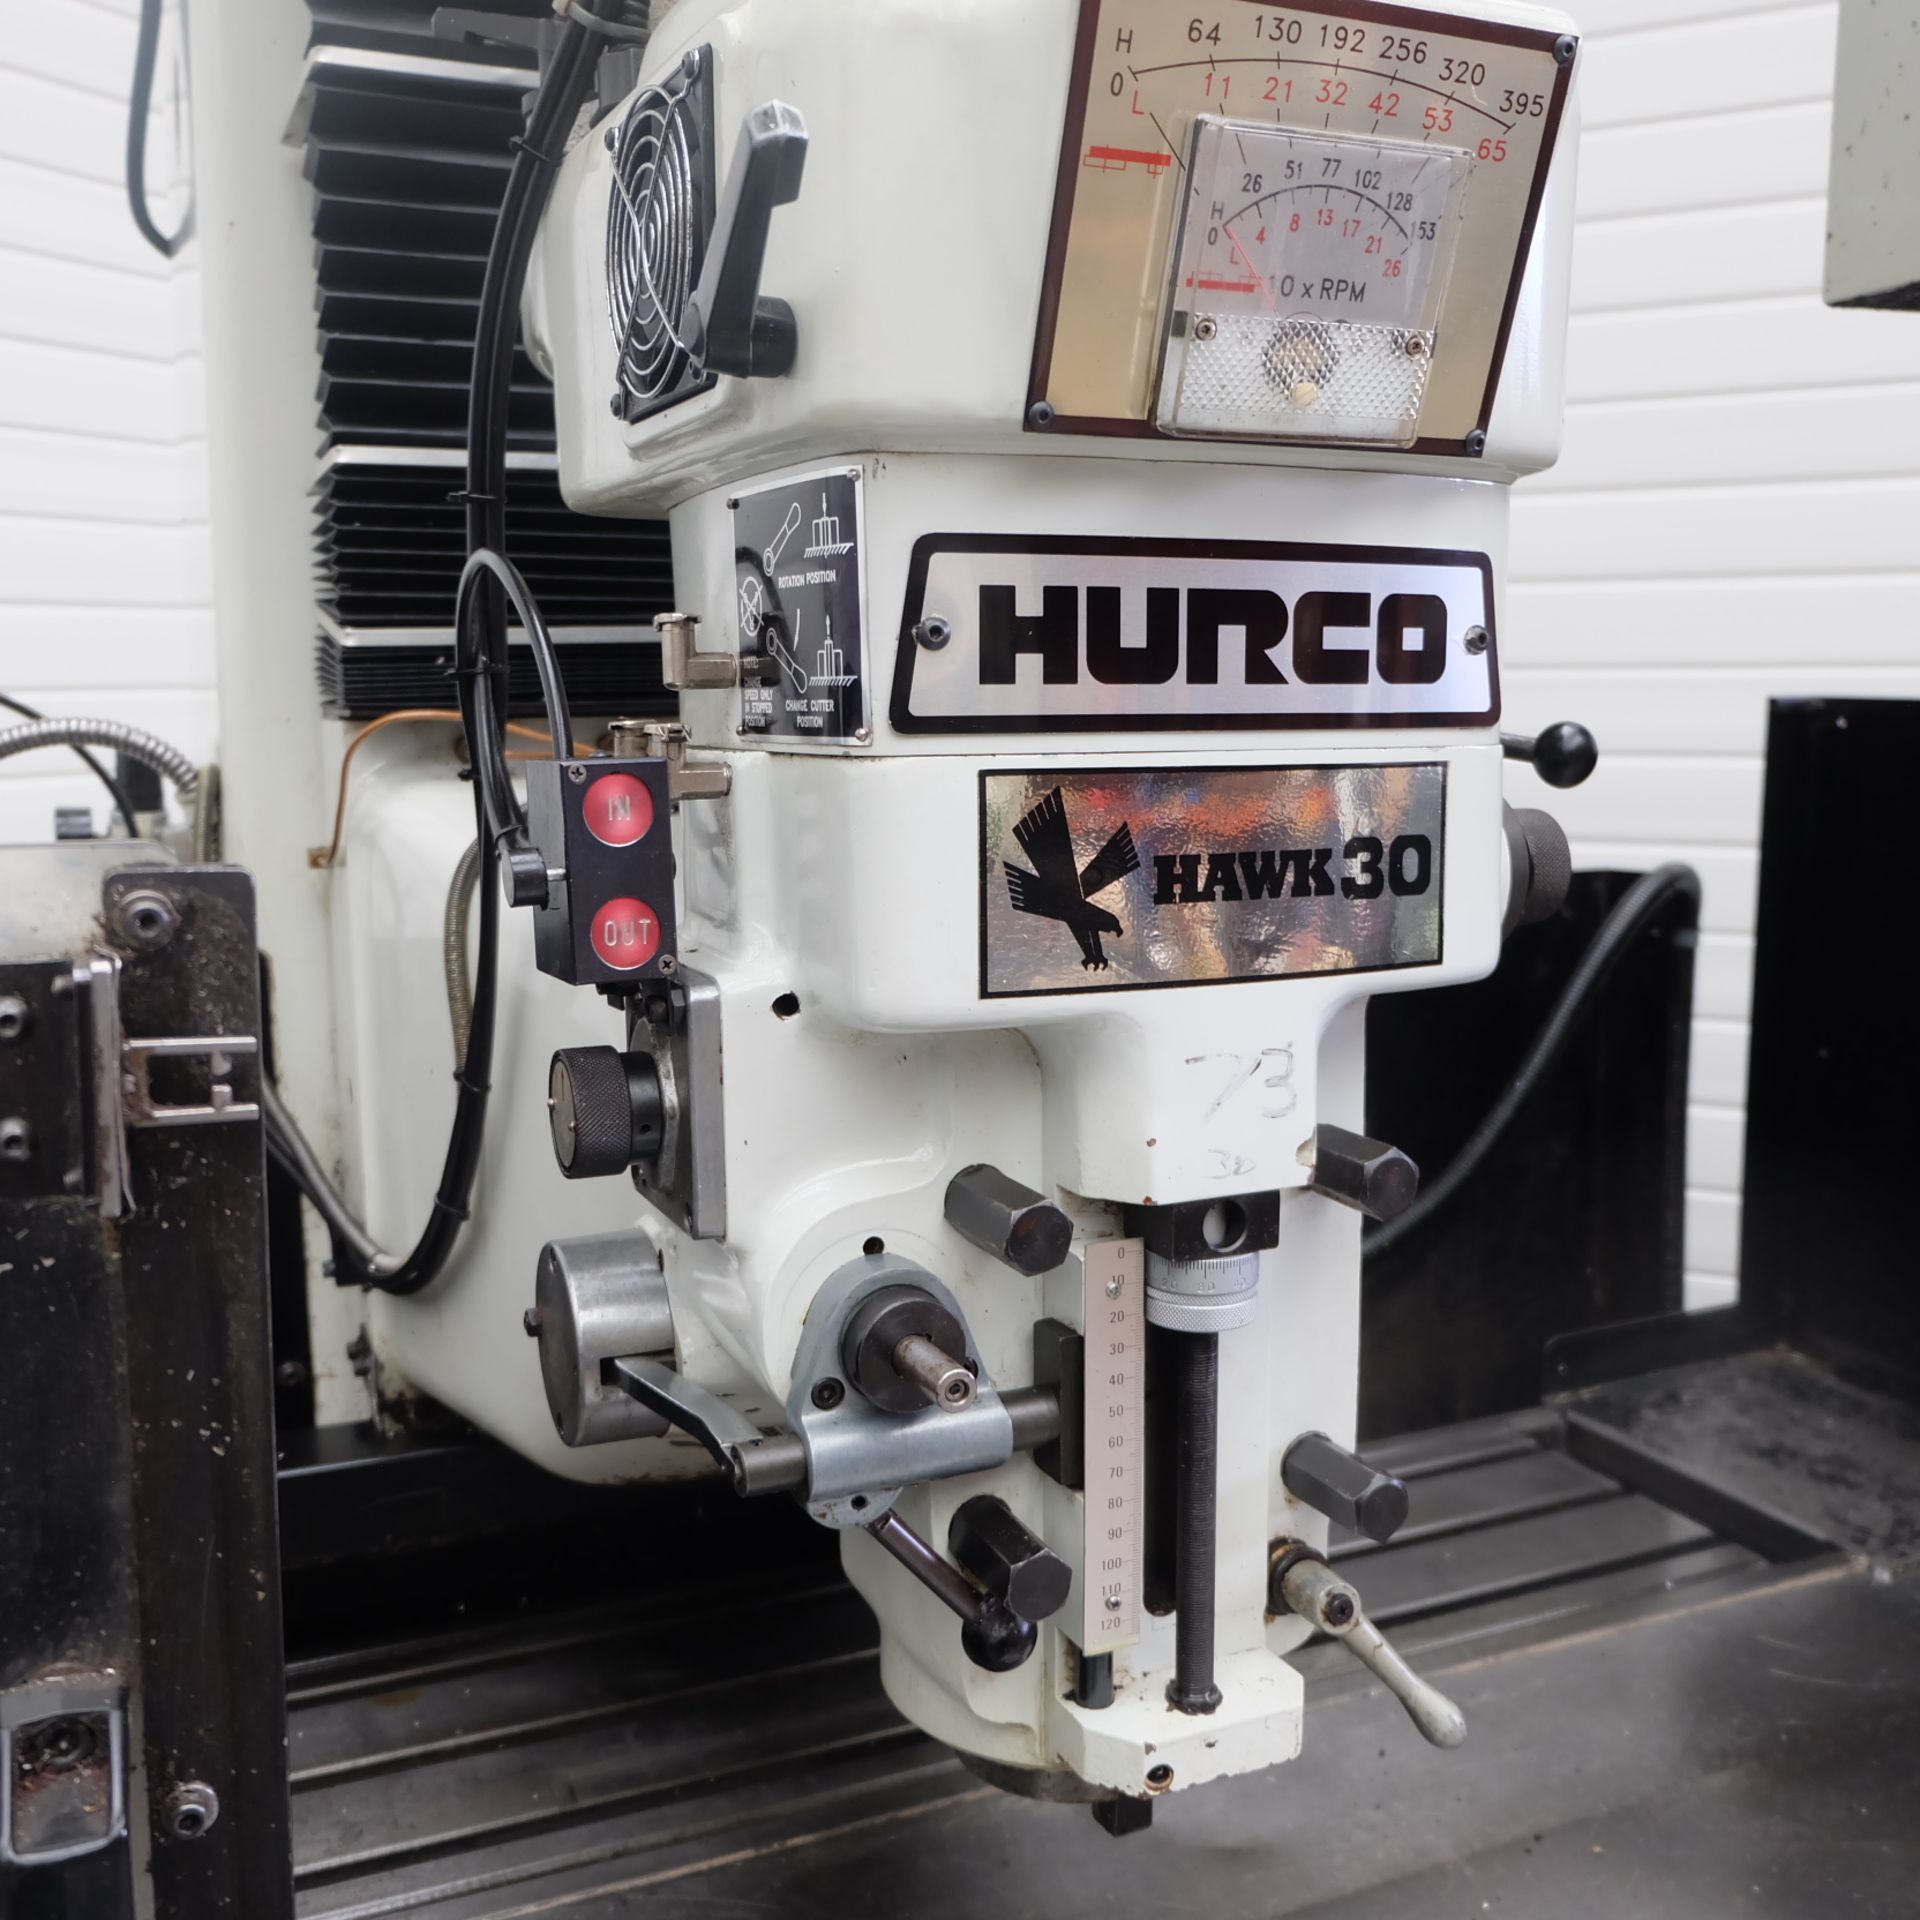 Hurco Hawk 30 CNC 3 Axis Vertical CNC Mill With Ultimax 55m Control. - Image 4 of 15